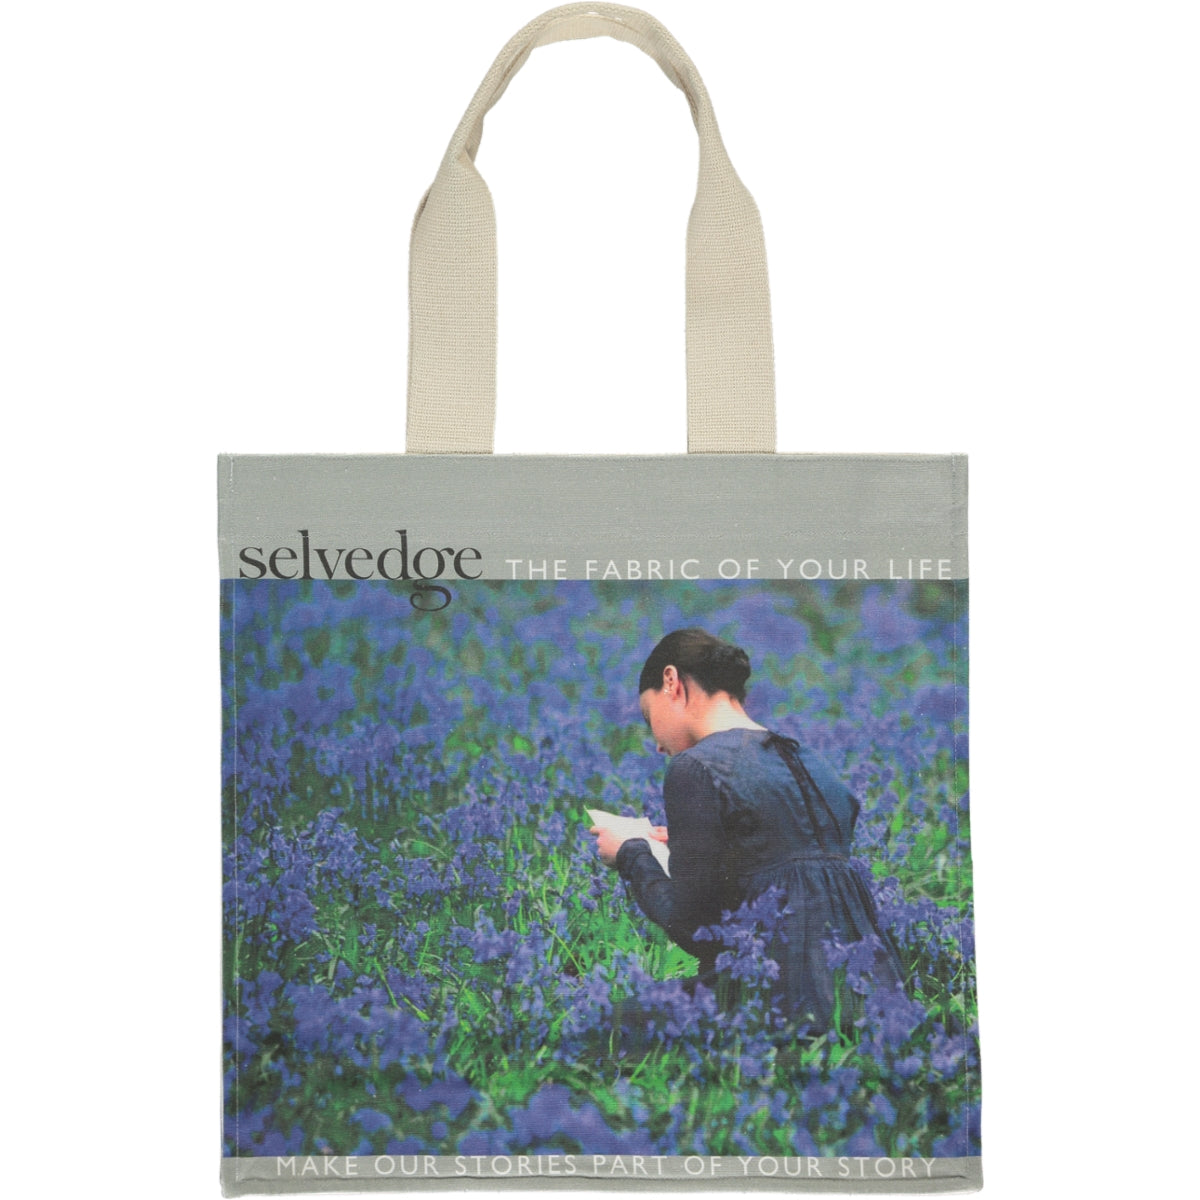 The Selvedge Totes